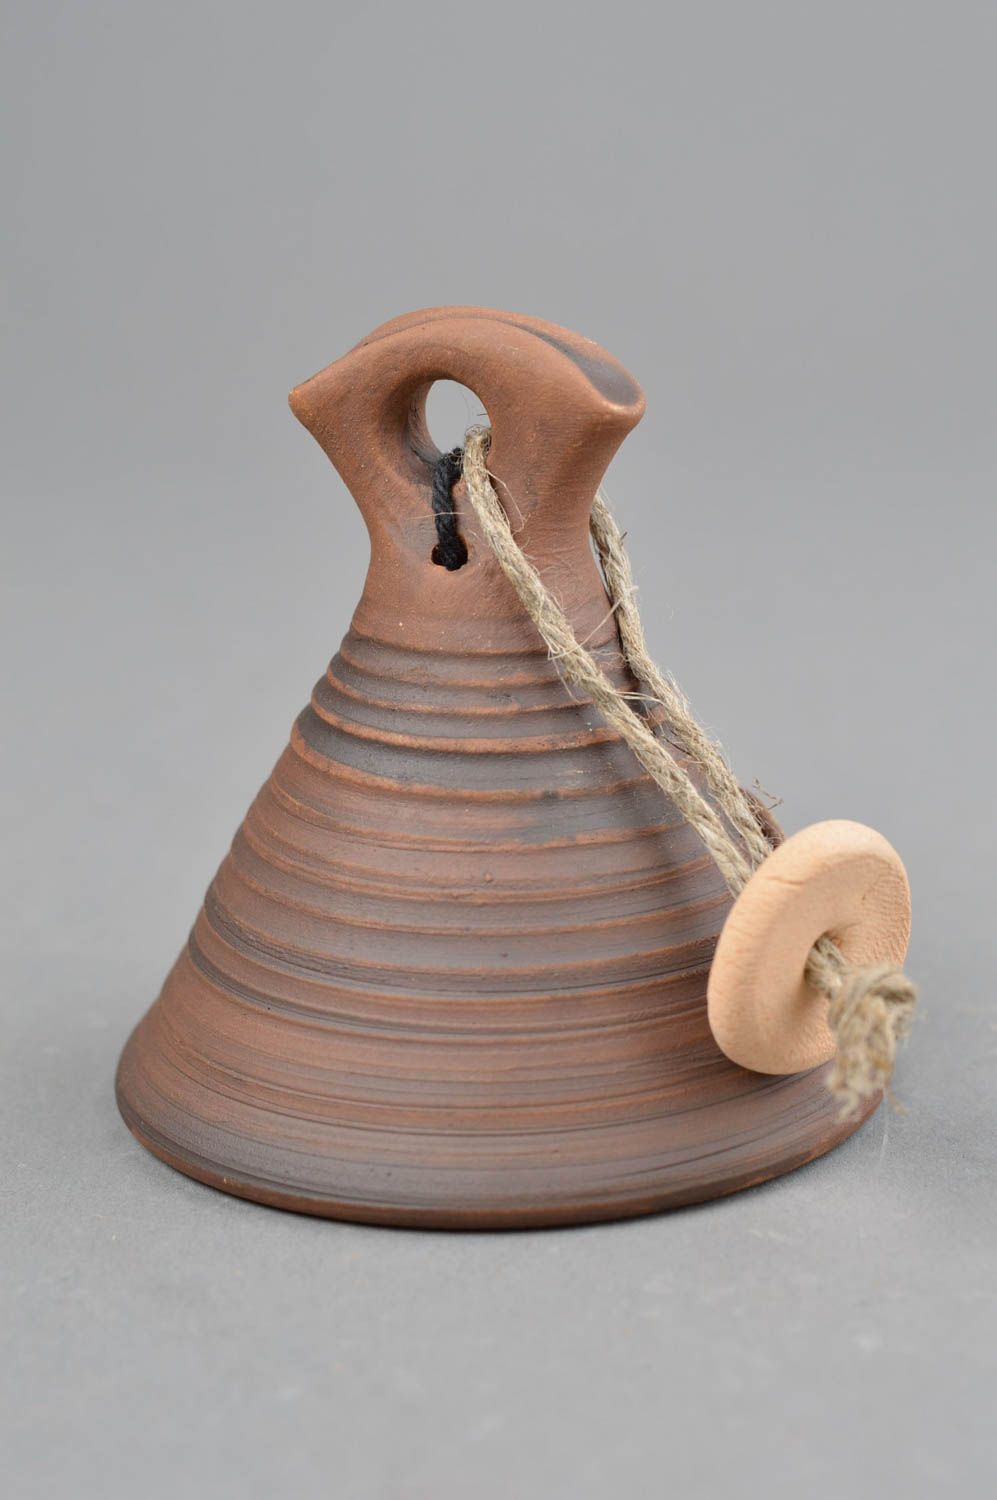 Handmade ceramic bell homemade home decor wall hanging decoration clay bell photo 2